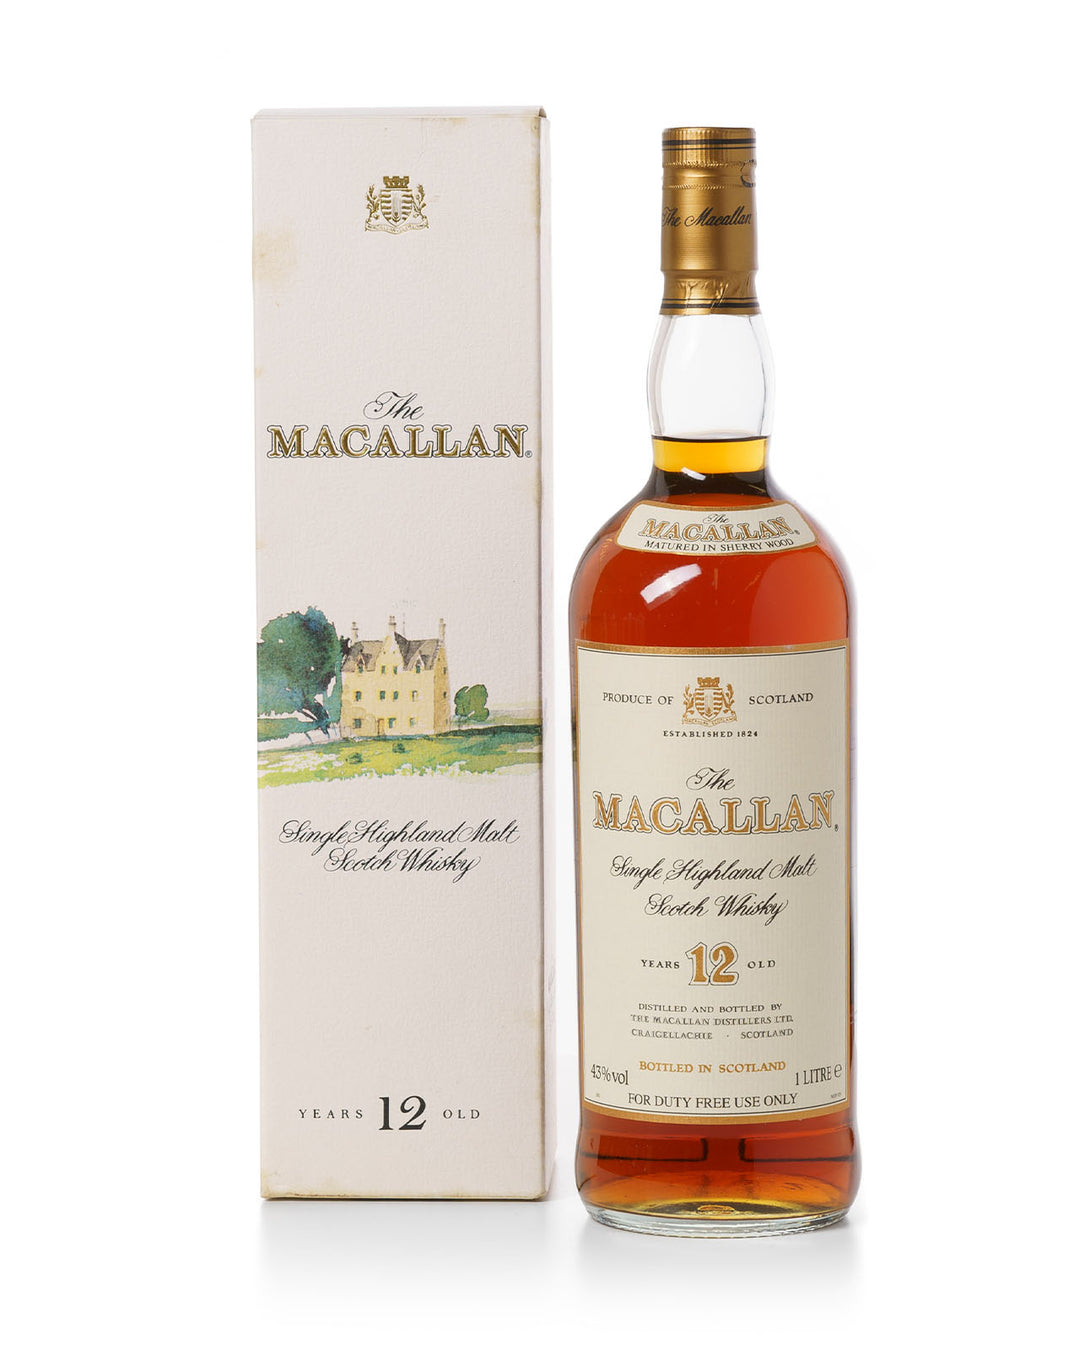 Macallan 12 Year Old Sherry Cask 1 Litre Foil Capsule With Original Box